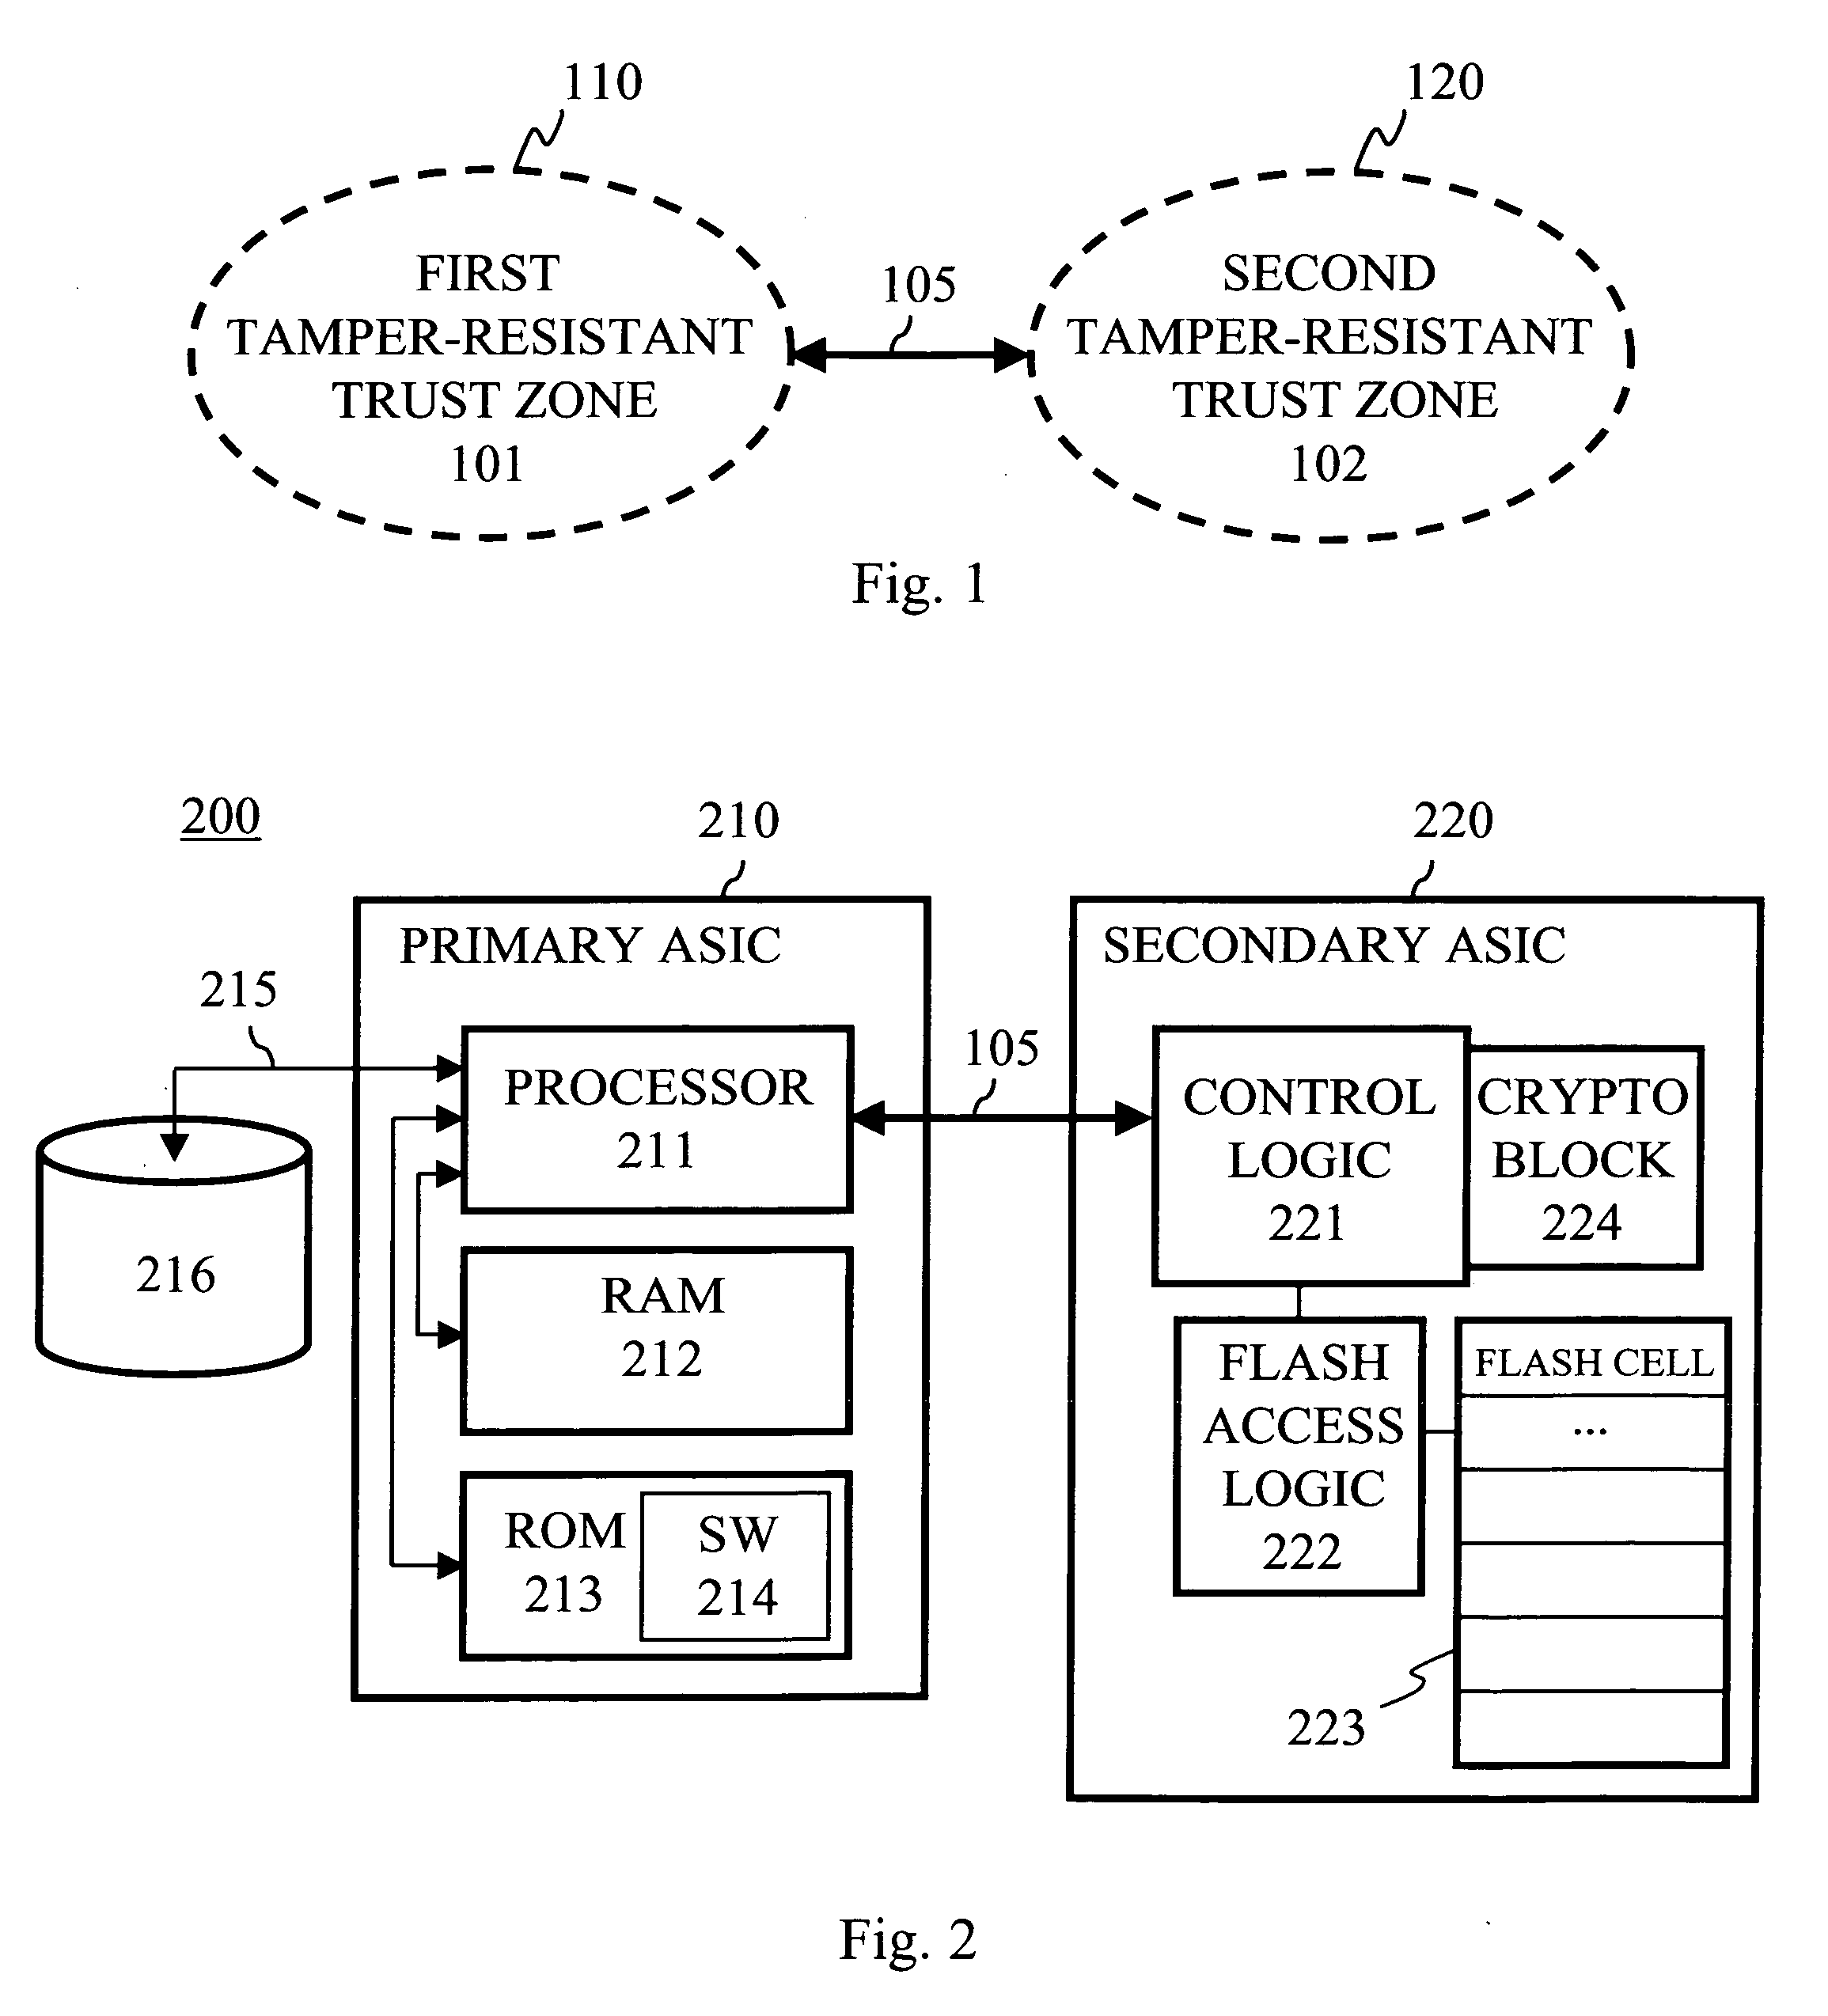 Implementation of an integrity-protected secure storage